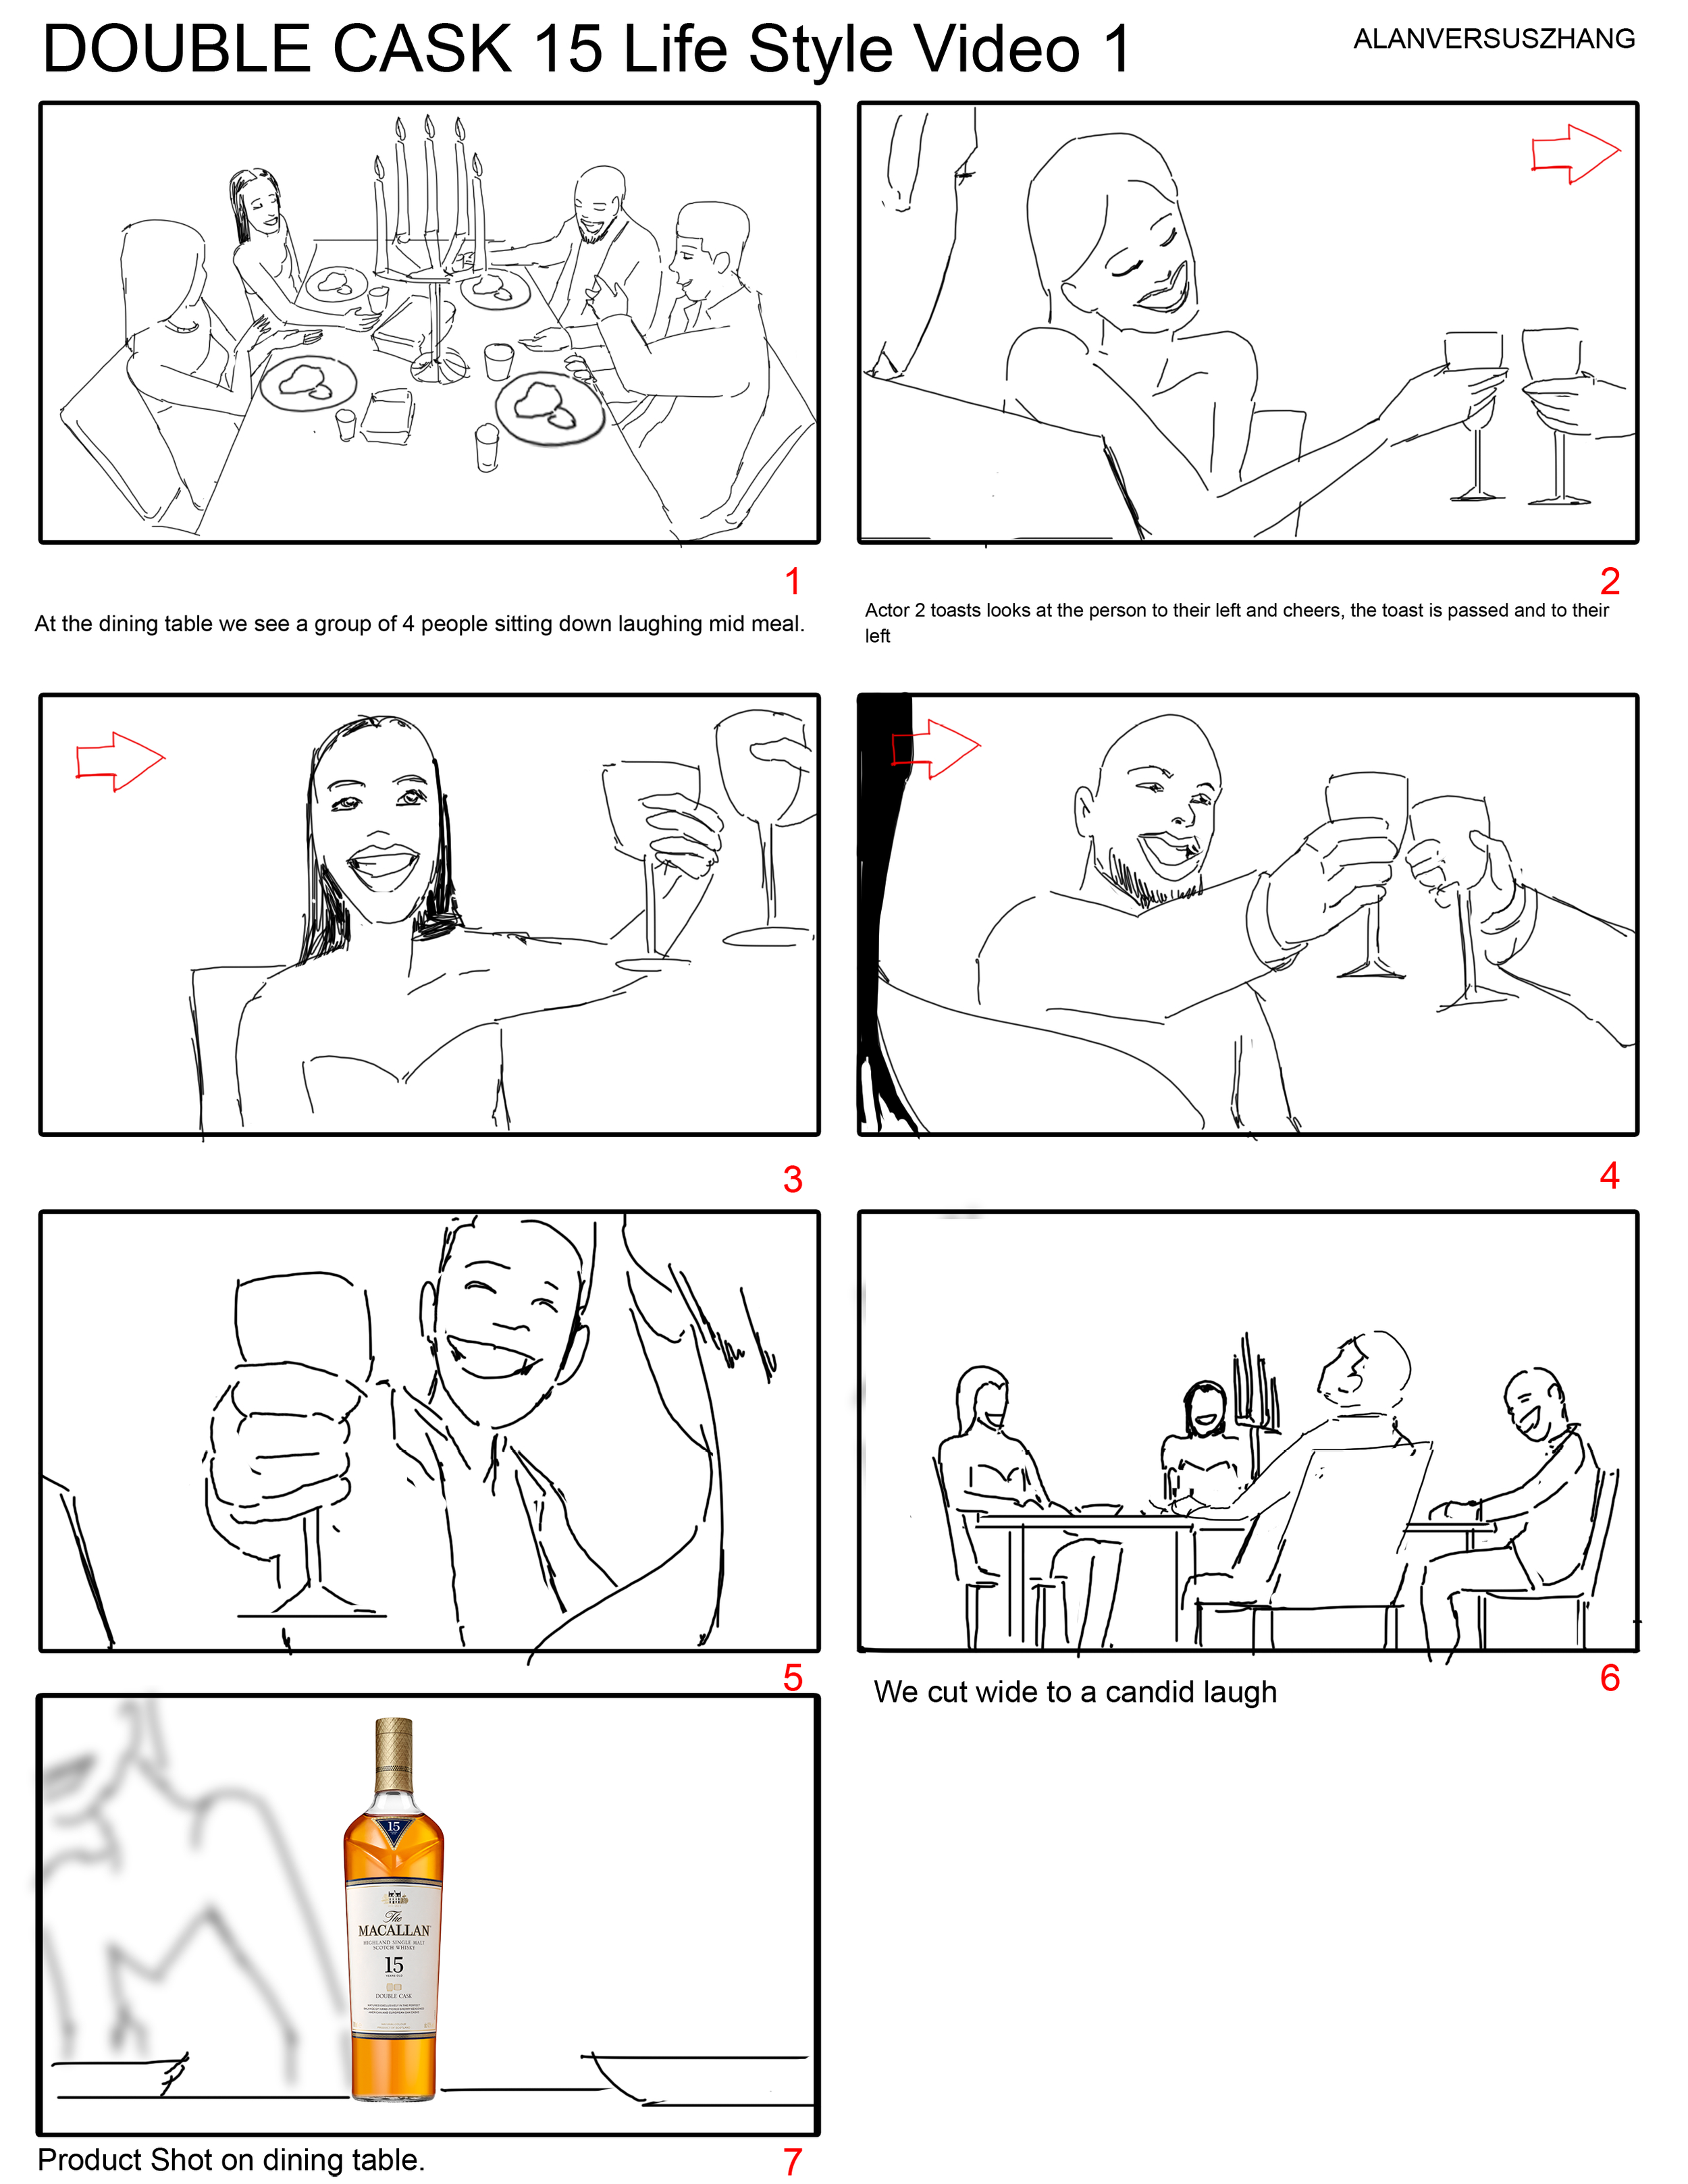 11.10.23_Macallan_Storyboards_Page_07_Image_0001.png